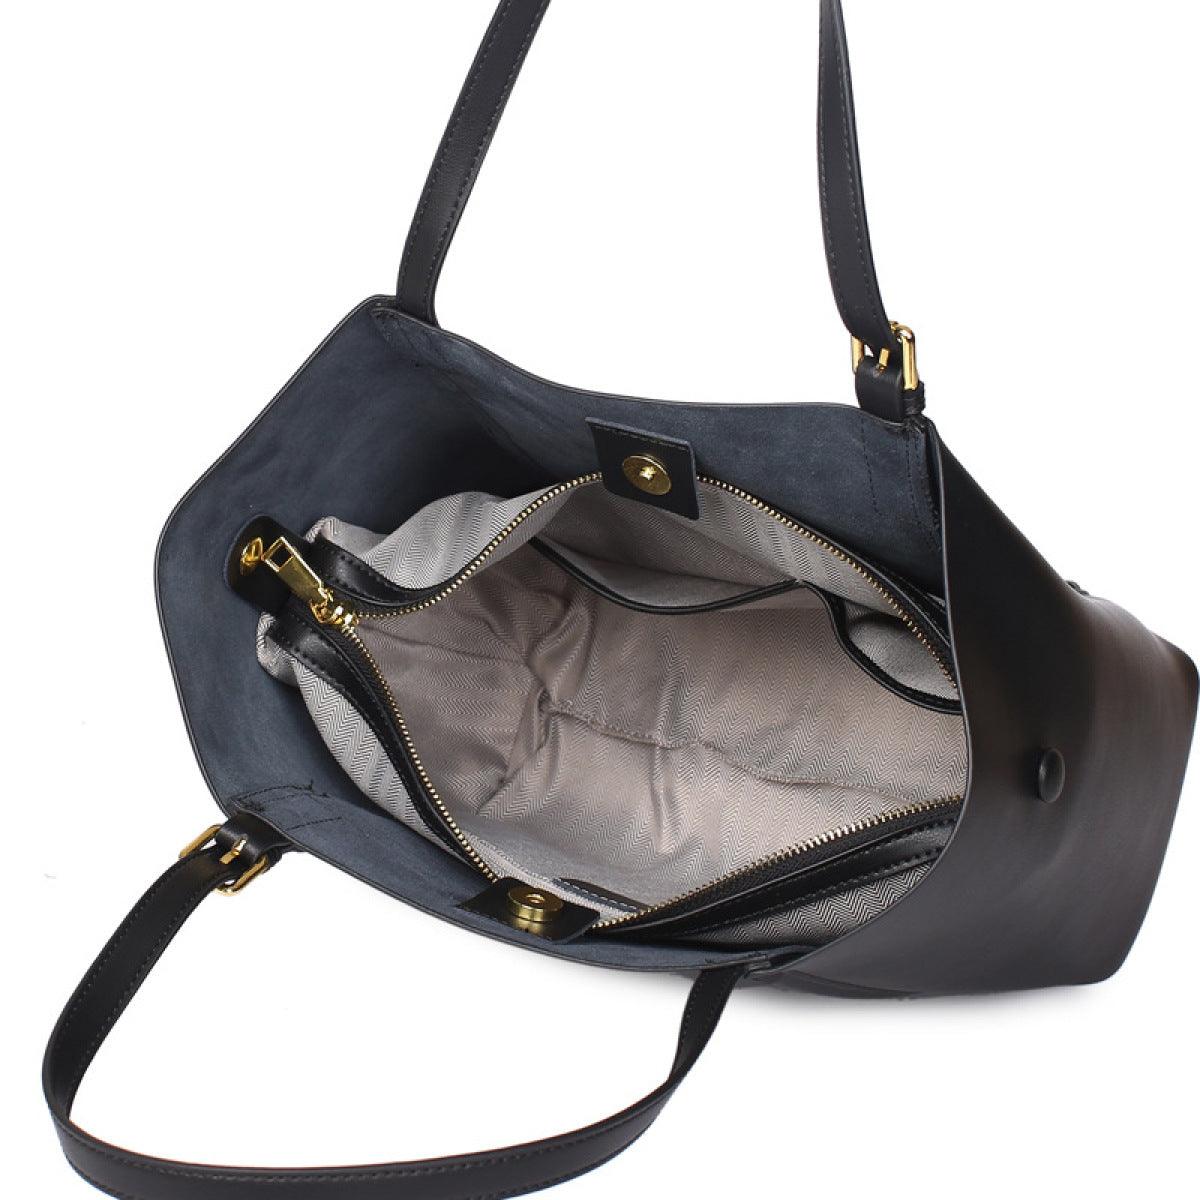 Stay Fashionable While Carrying Everything You Need With Our High Capacity Tote Shoulder Bag With Zipper